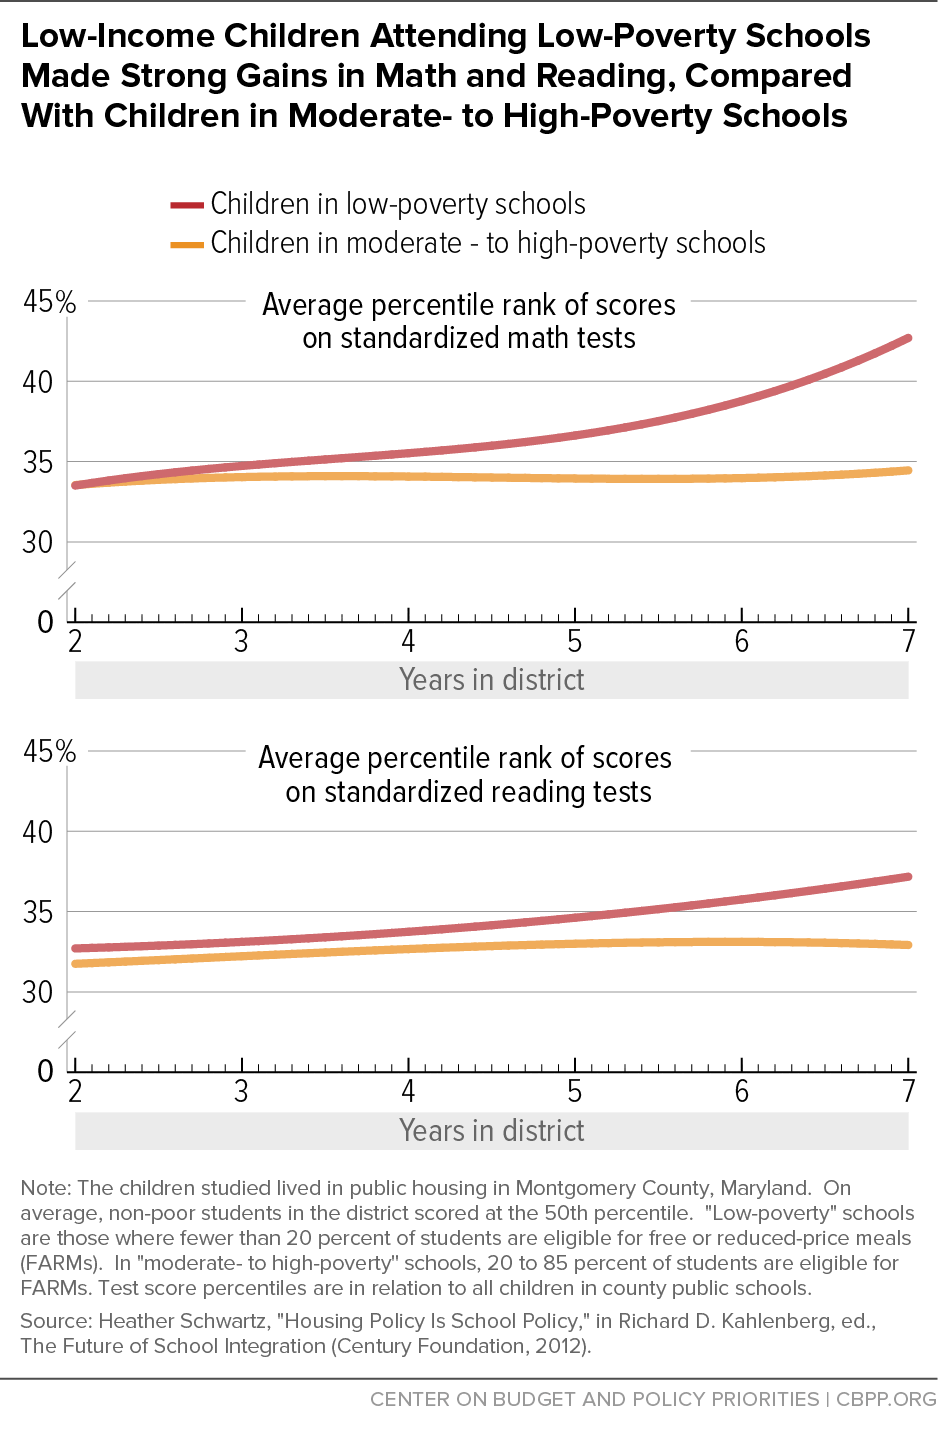 Low-Income Children Attending Low-Poverty Schools Made Strong Gains in Math and Reading